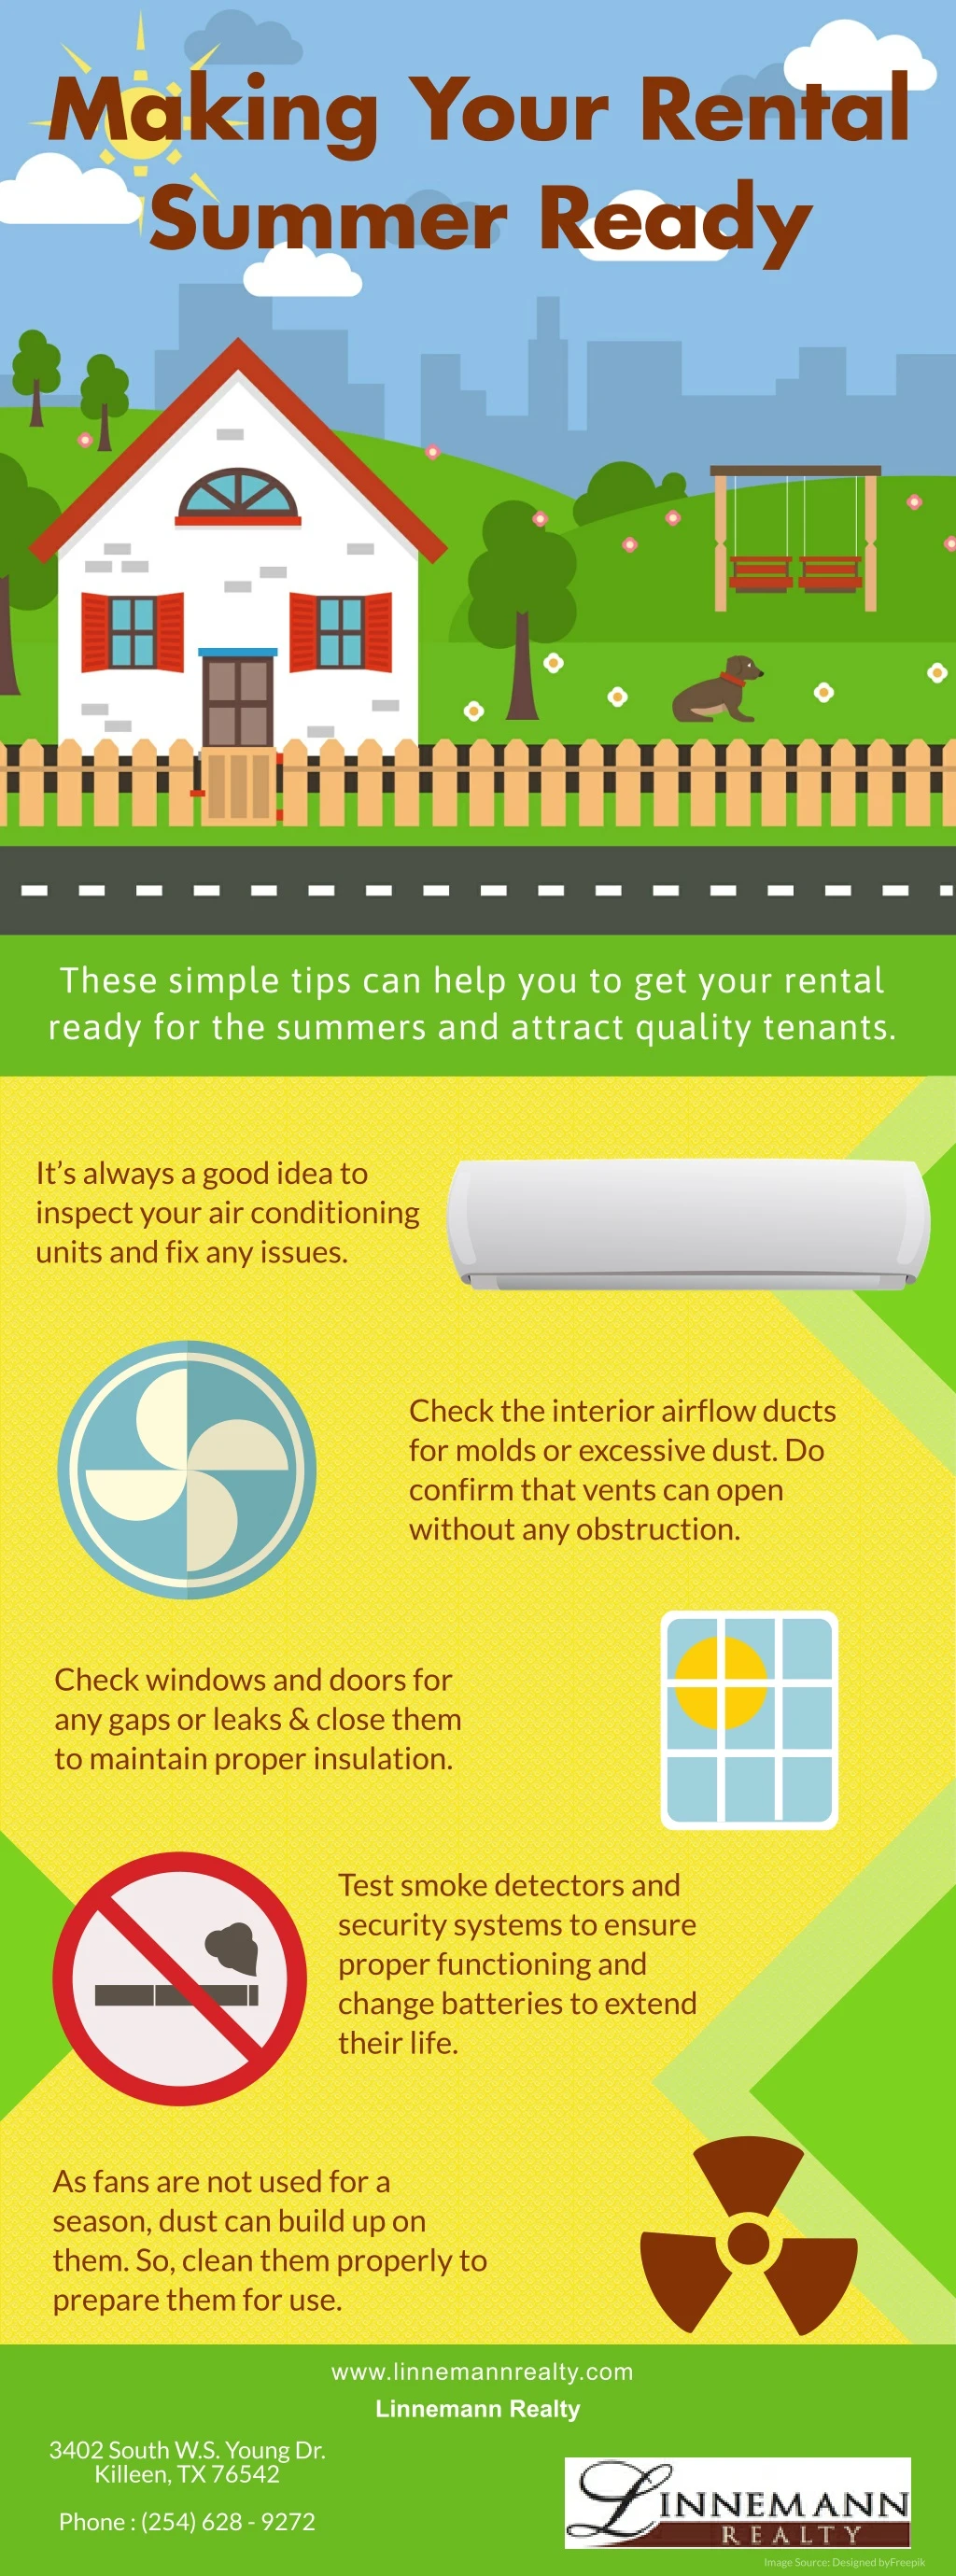 making your rental summer ready